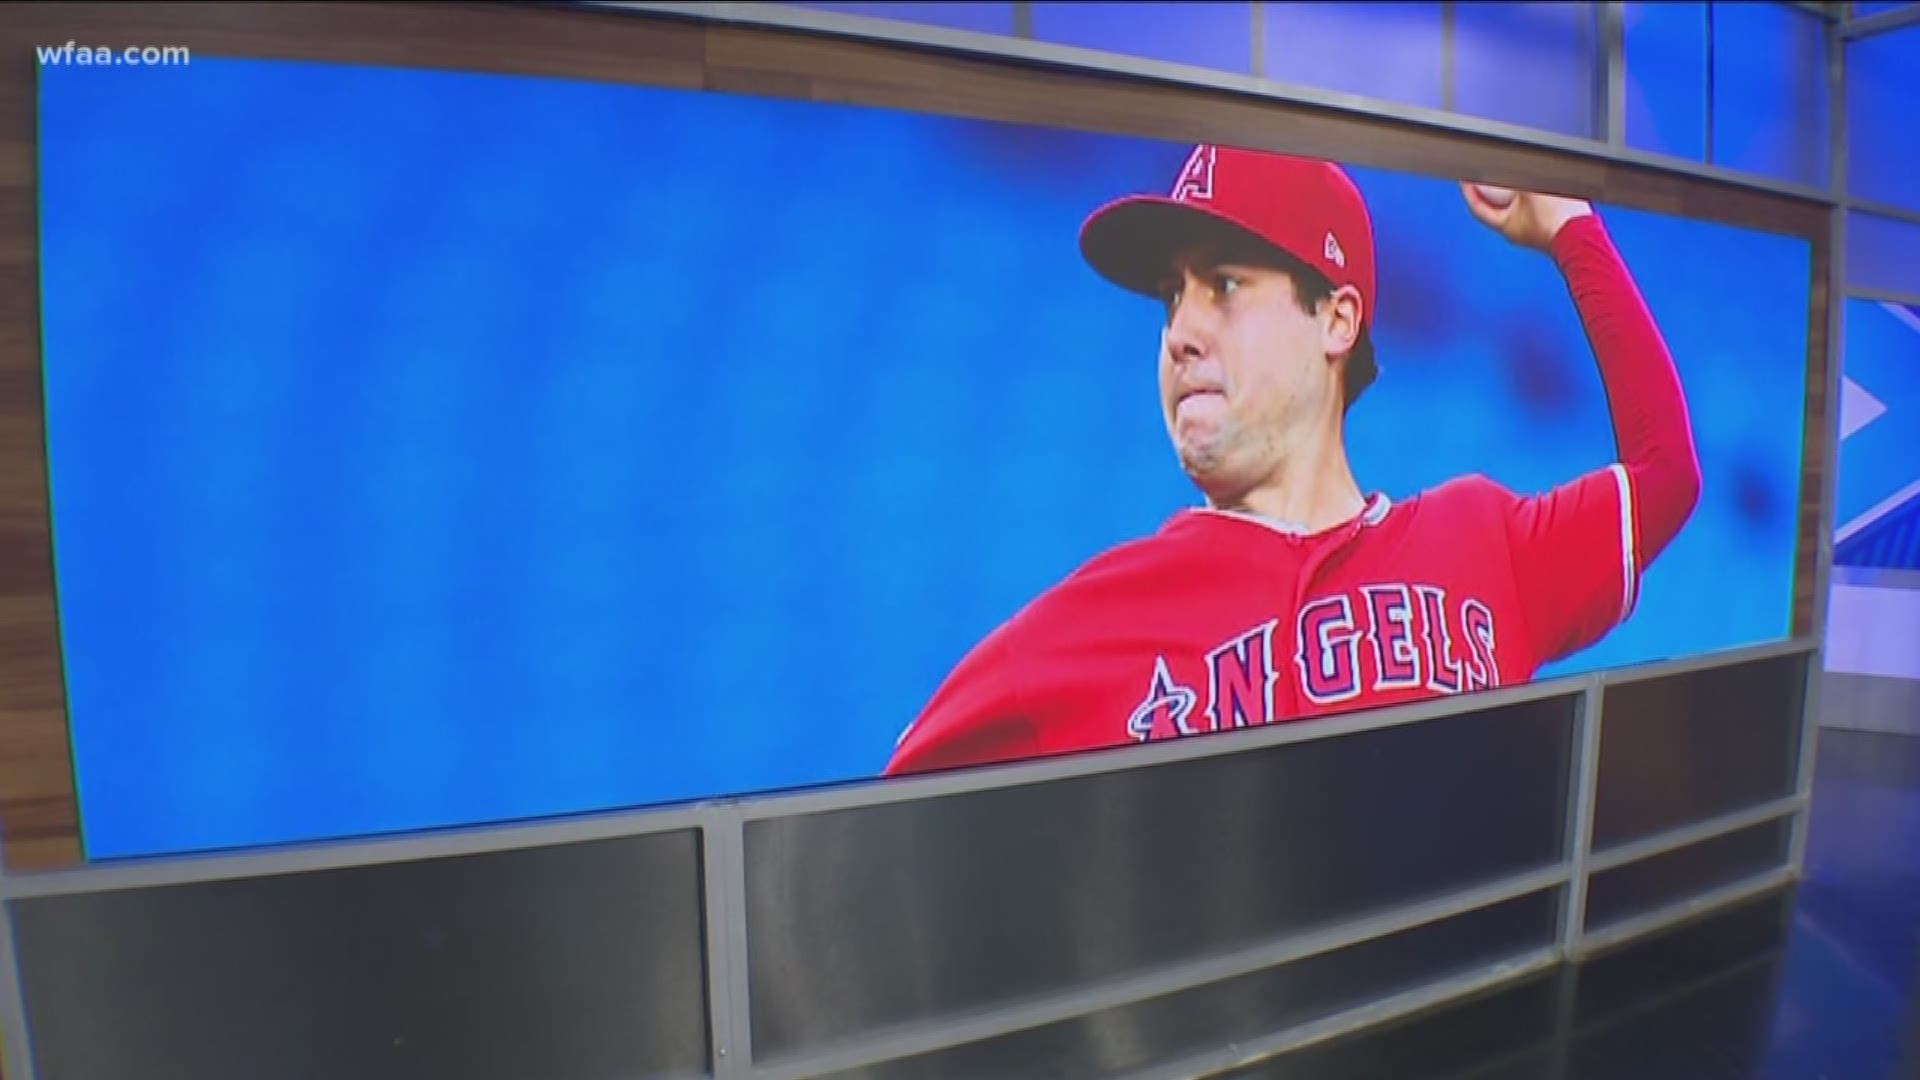 The Angels announced Monday afternoon that 27-year-old Tyler Skaggs died in Texas after arriving for a four-game series against the Rangers.